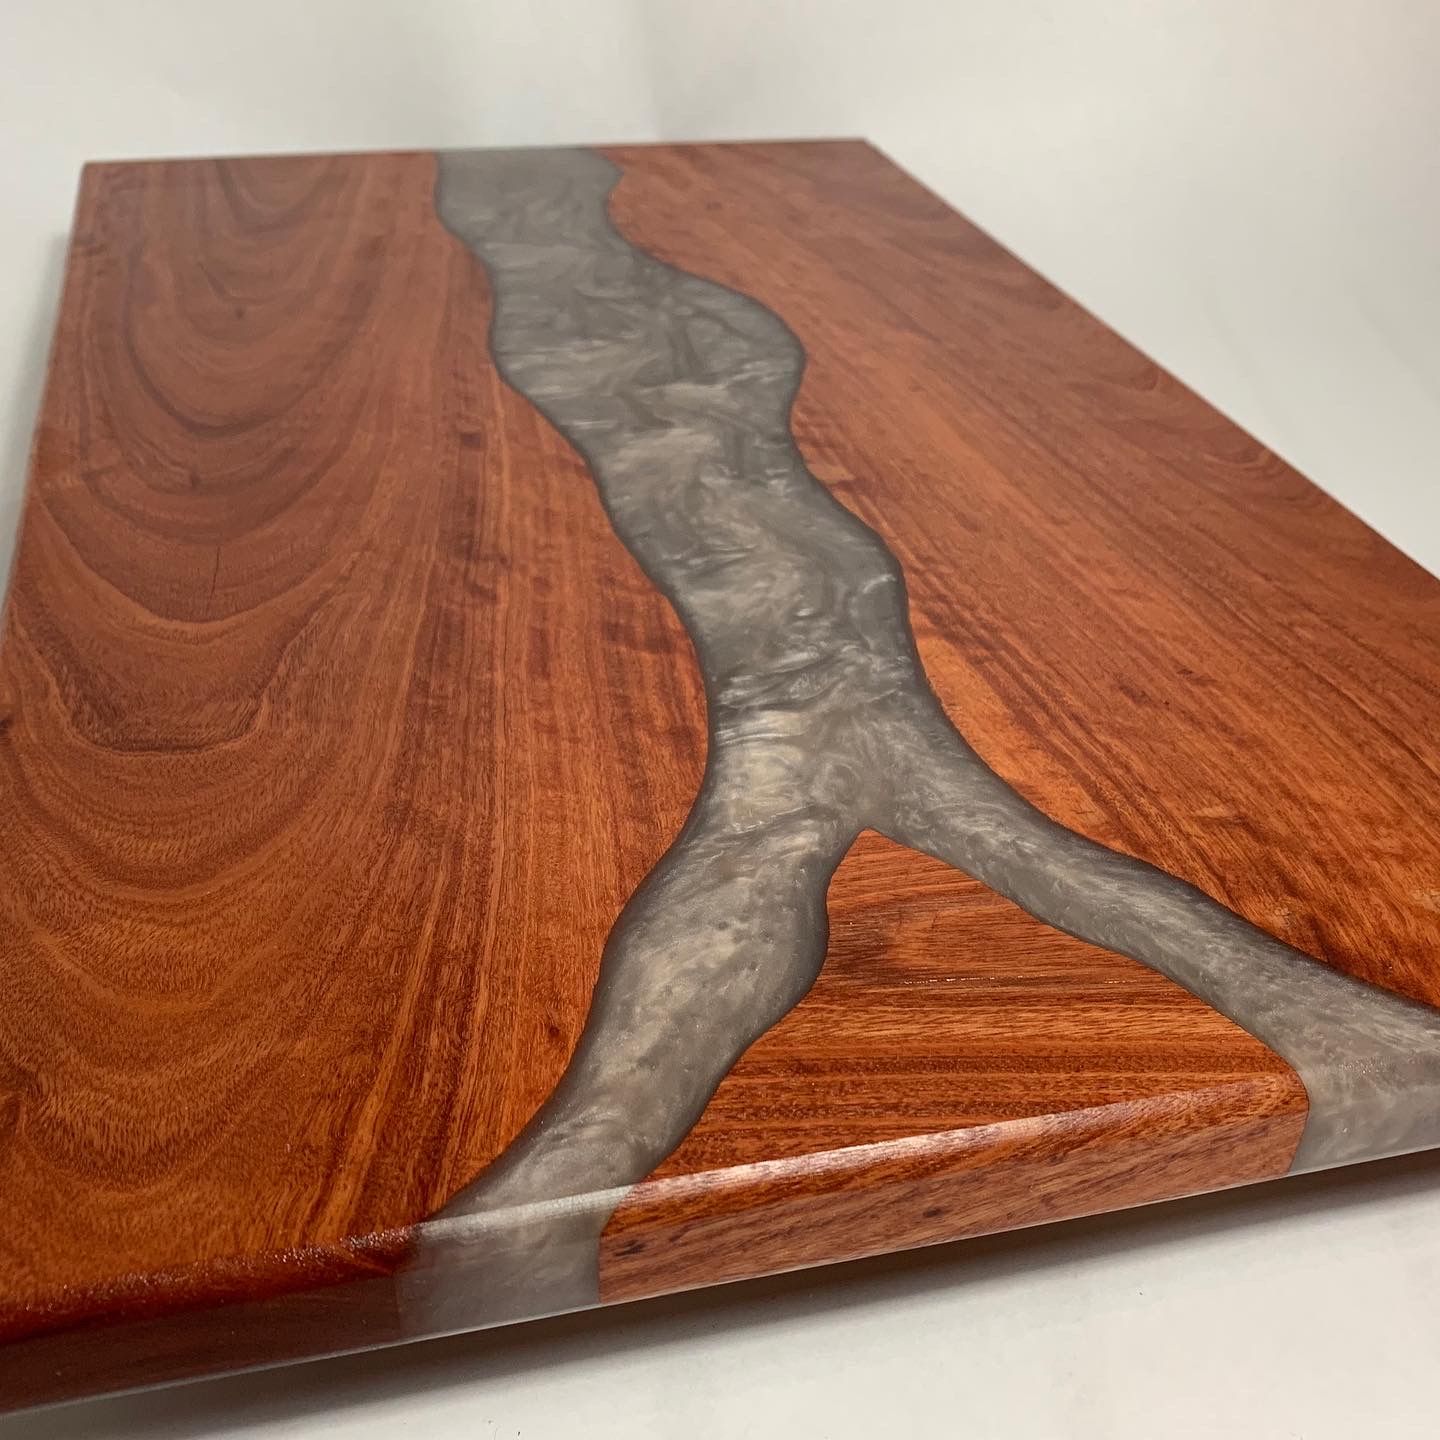 A wooden cutting board with a river in the middle of it.